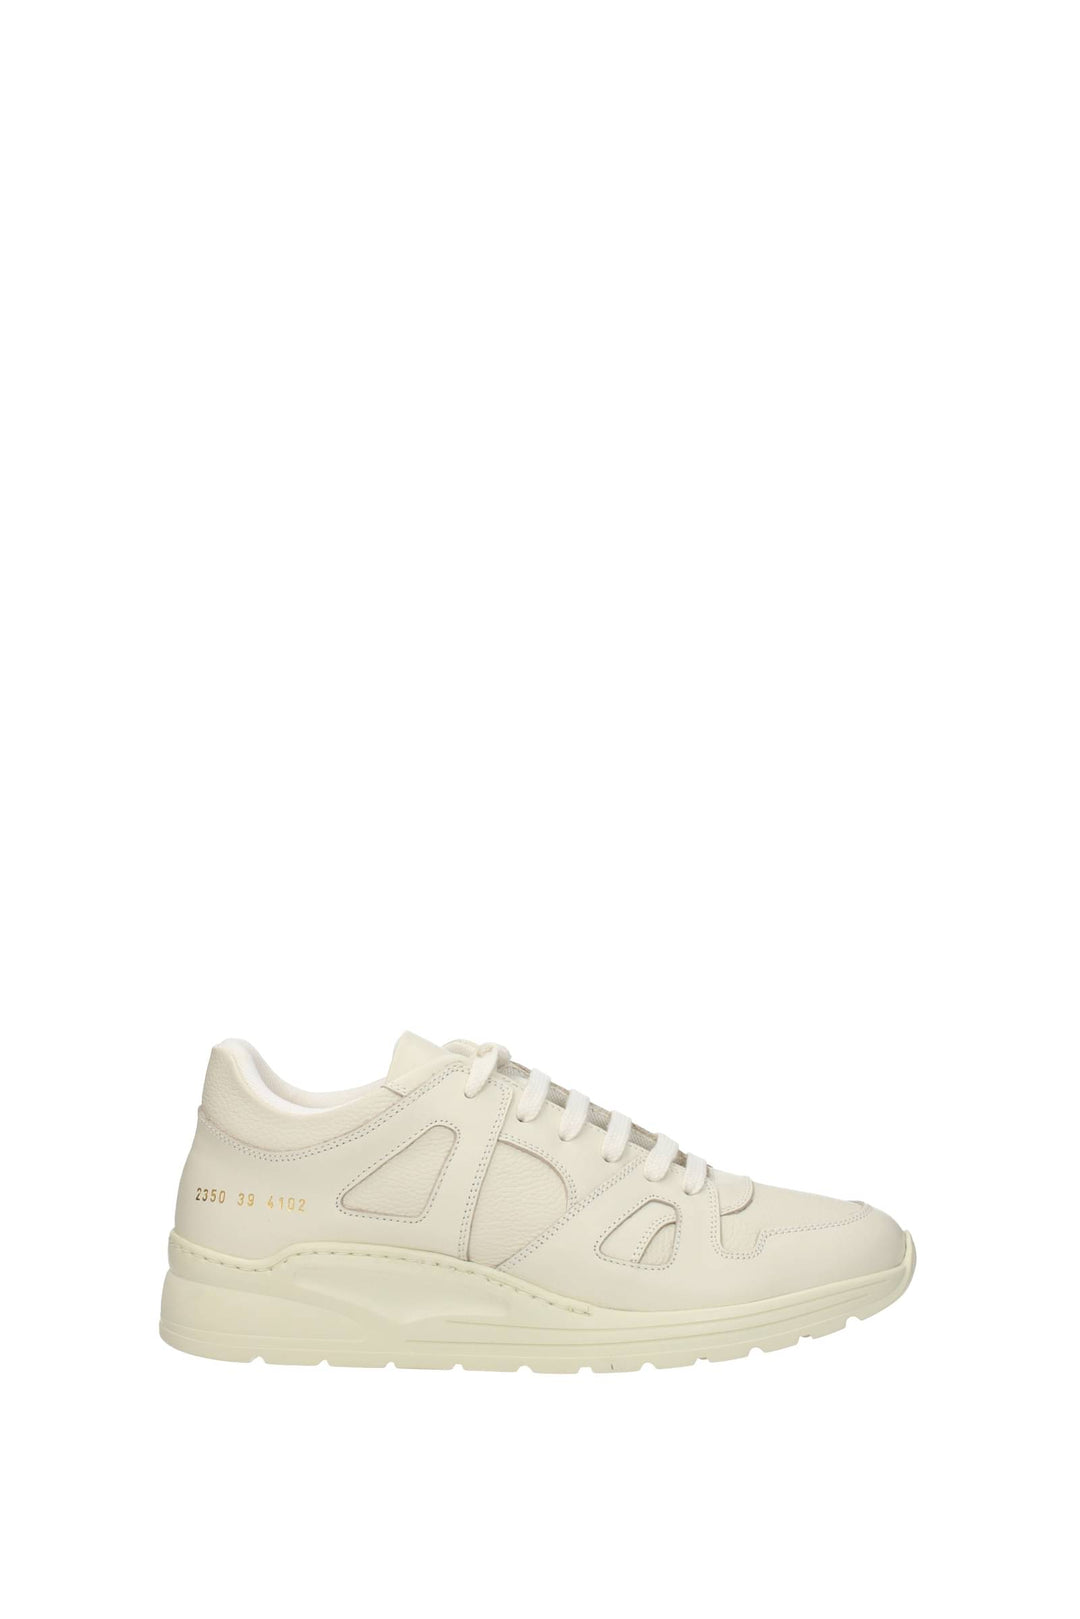 Sneakers Track Technical Pelle Beige - Common Projects - Uomo